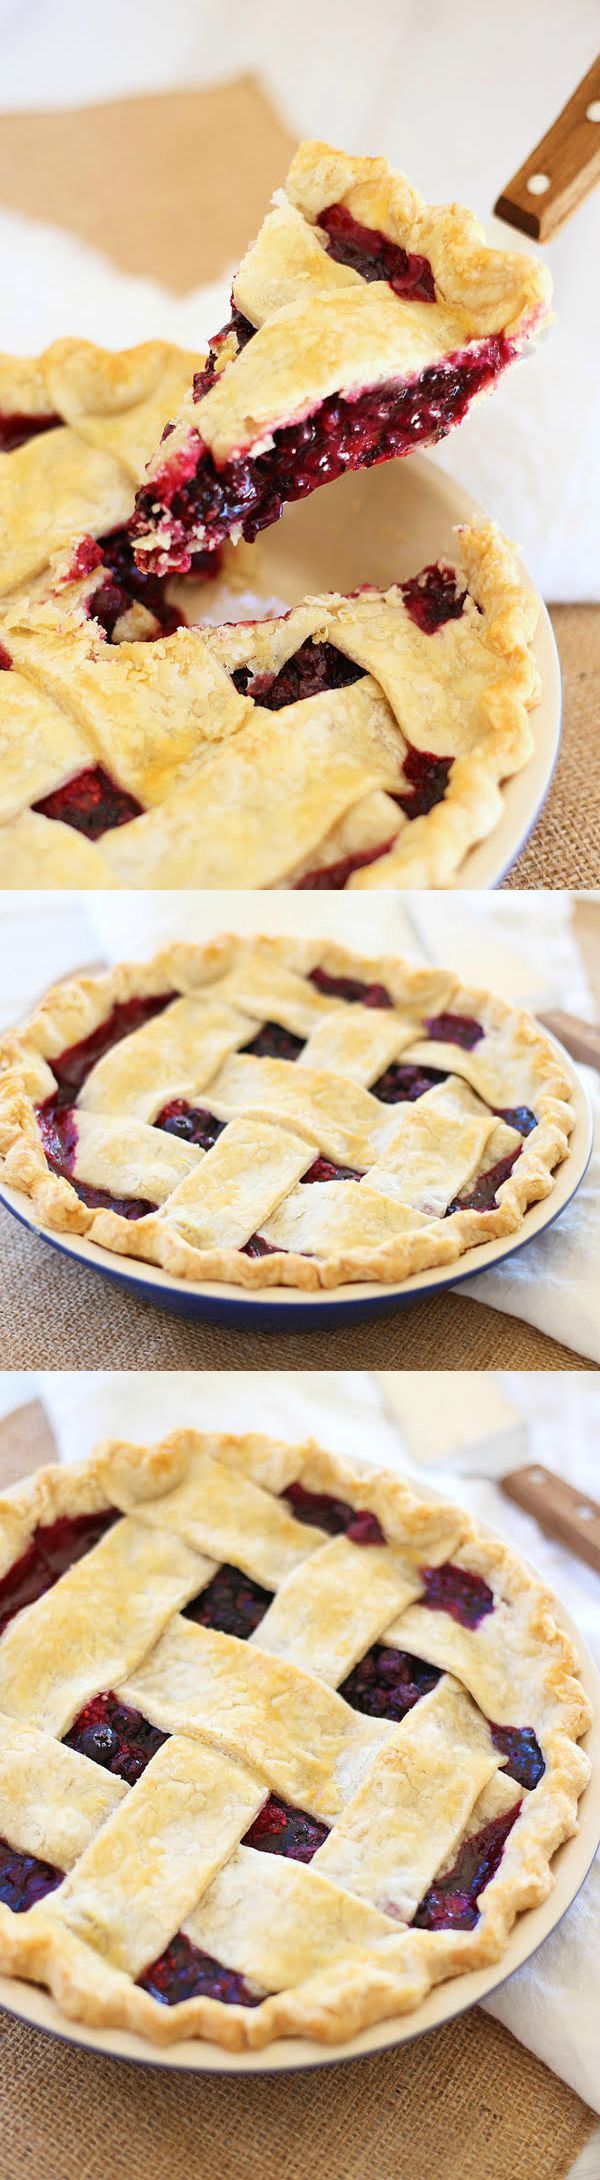 Triple Berry Pie - flaky and crumbly pie with sweet and delicious triple berry filling. This recipe is easy, fail proof and amazing! | rasamalaysia.com